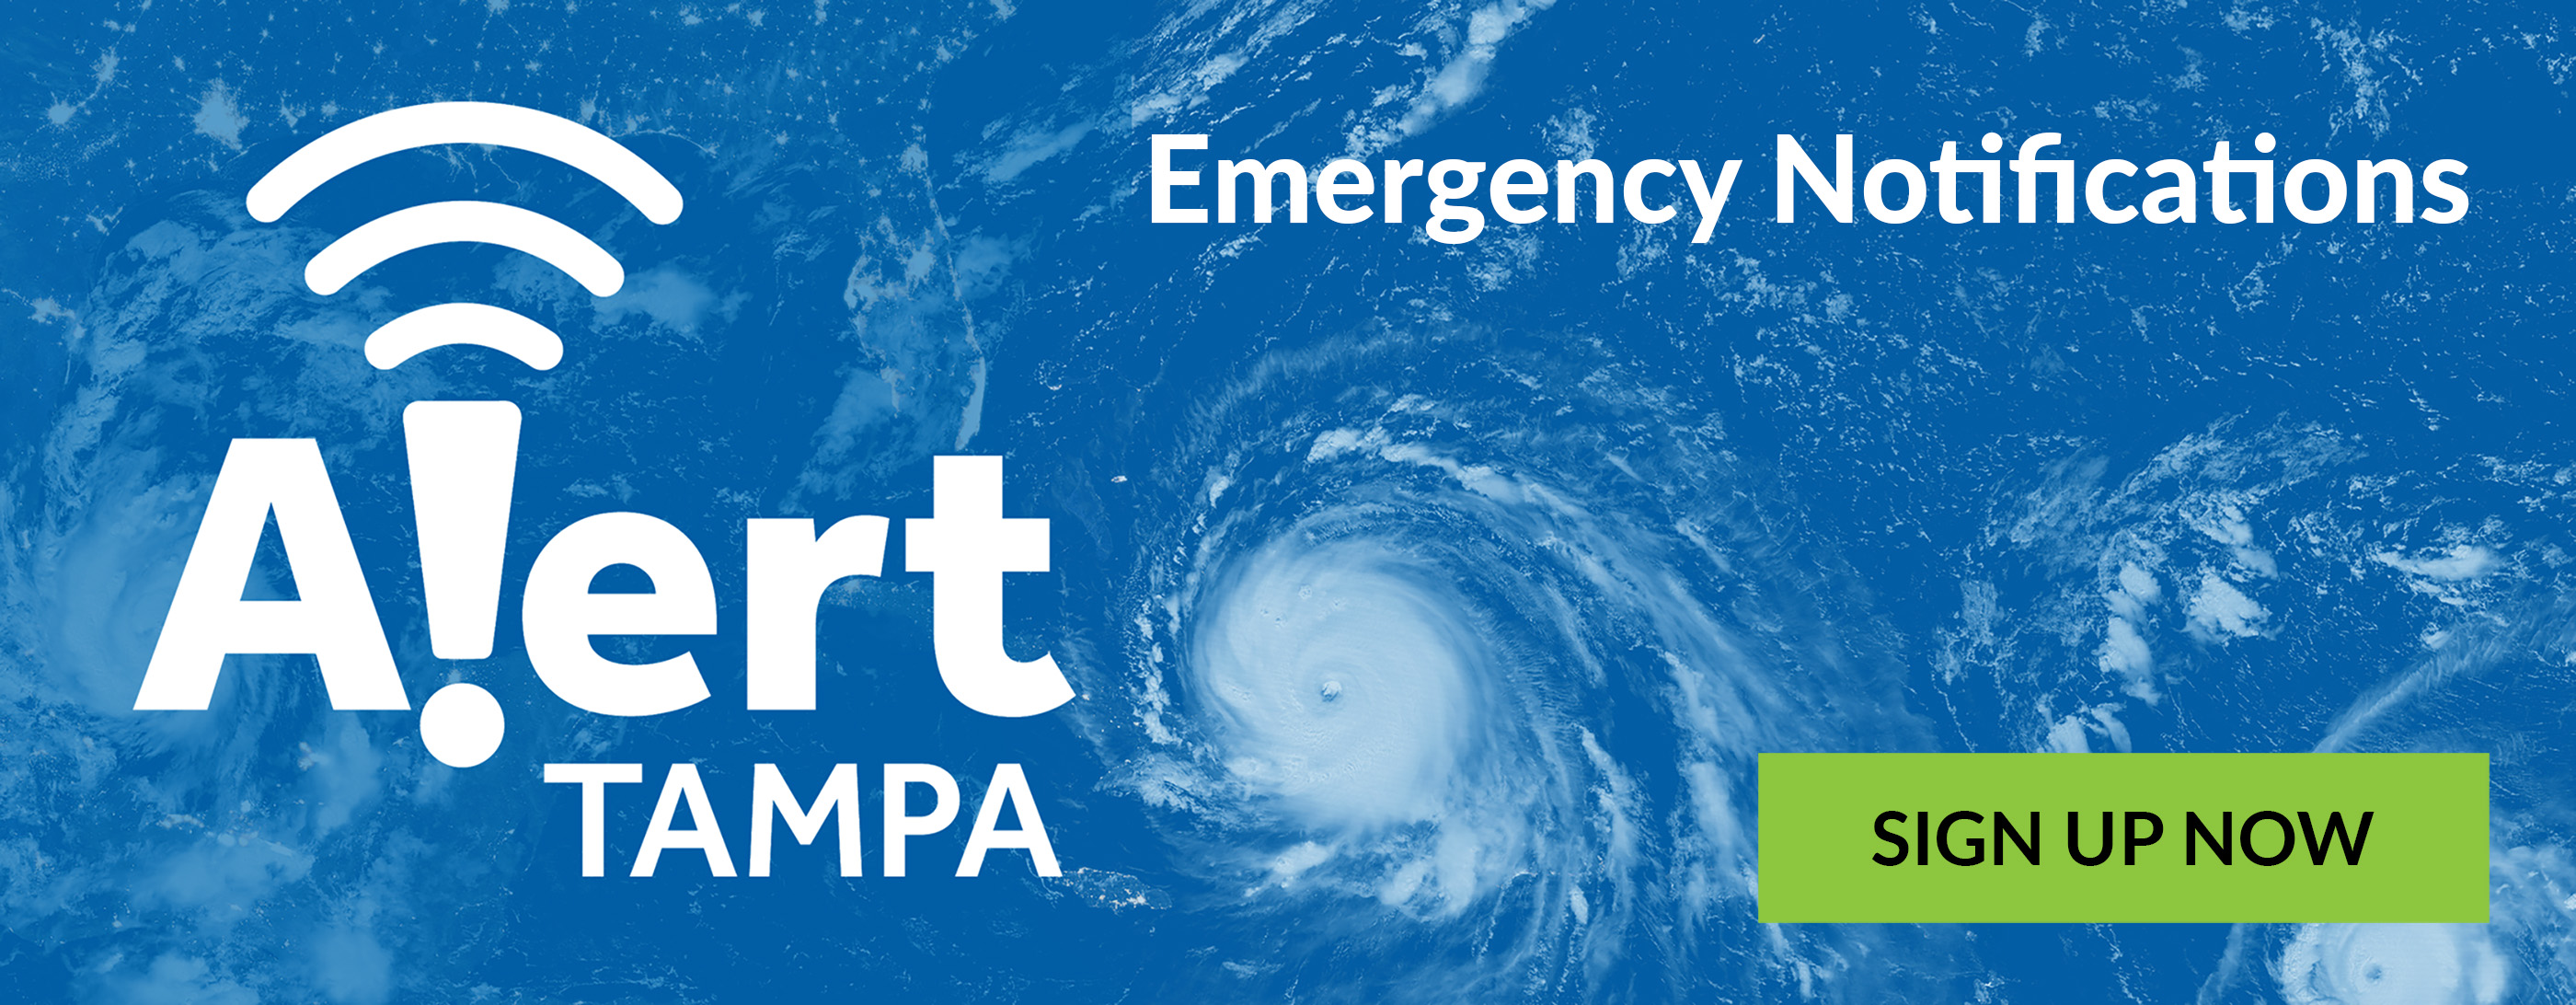 Alert Tampa - Emergency Notifications - Sign up Now